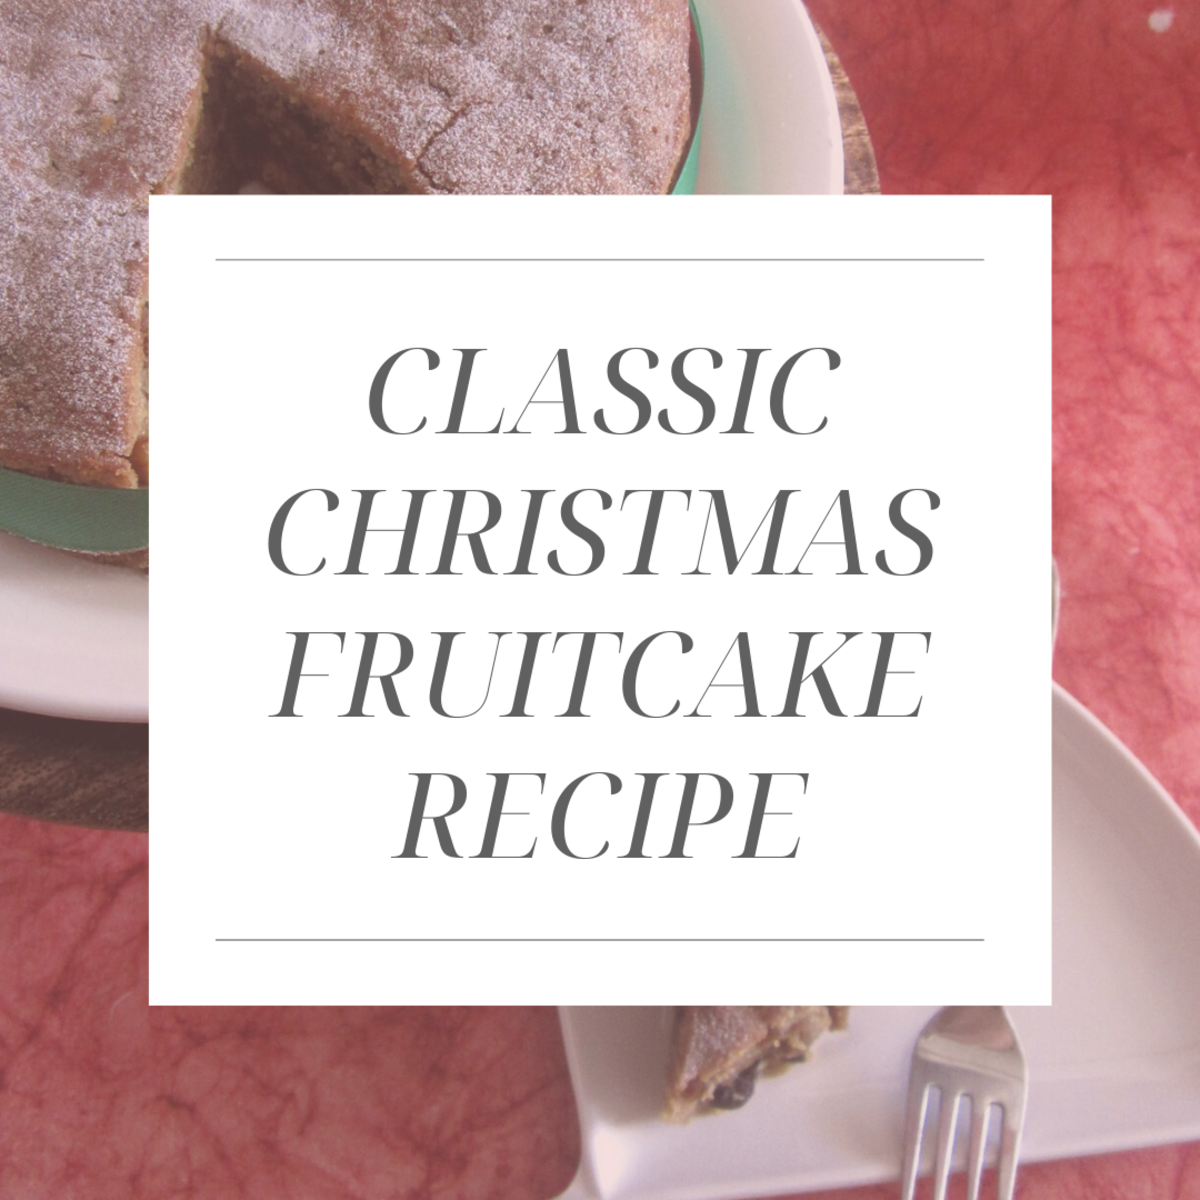 How to Make an Easy Classic Fruitcake for Christmas